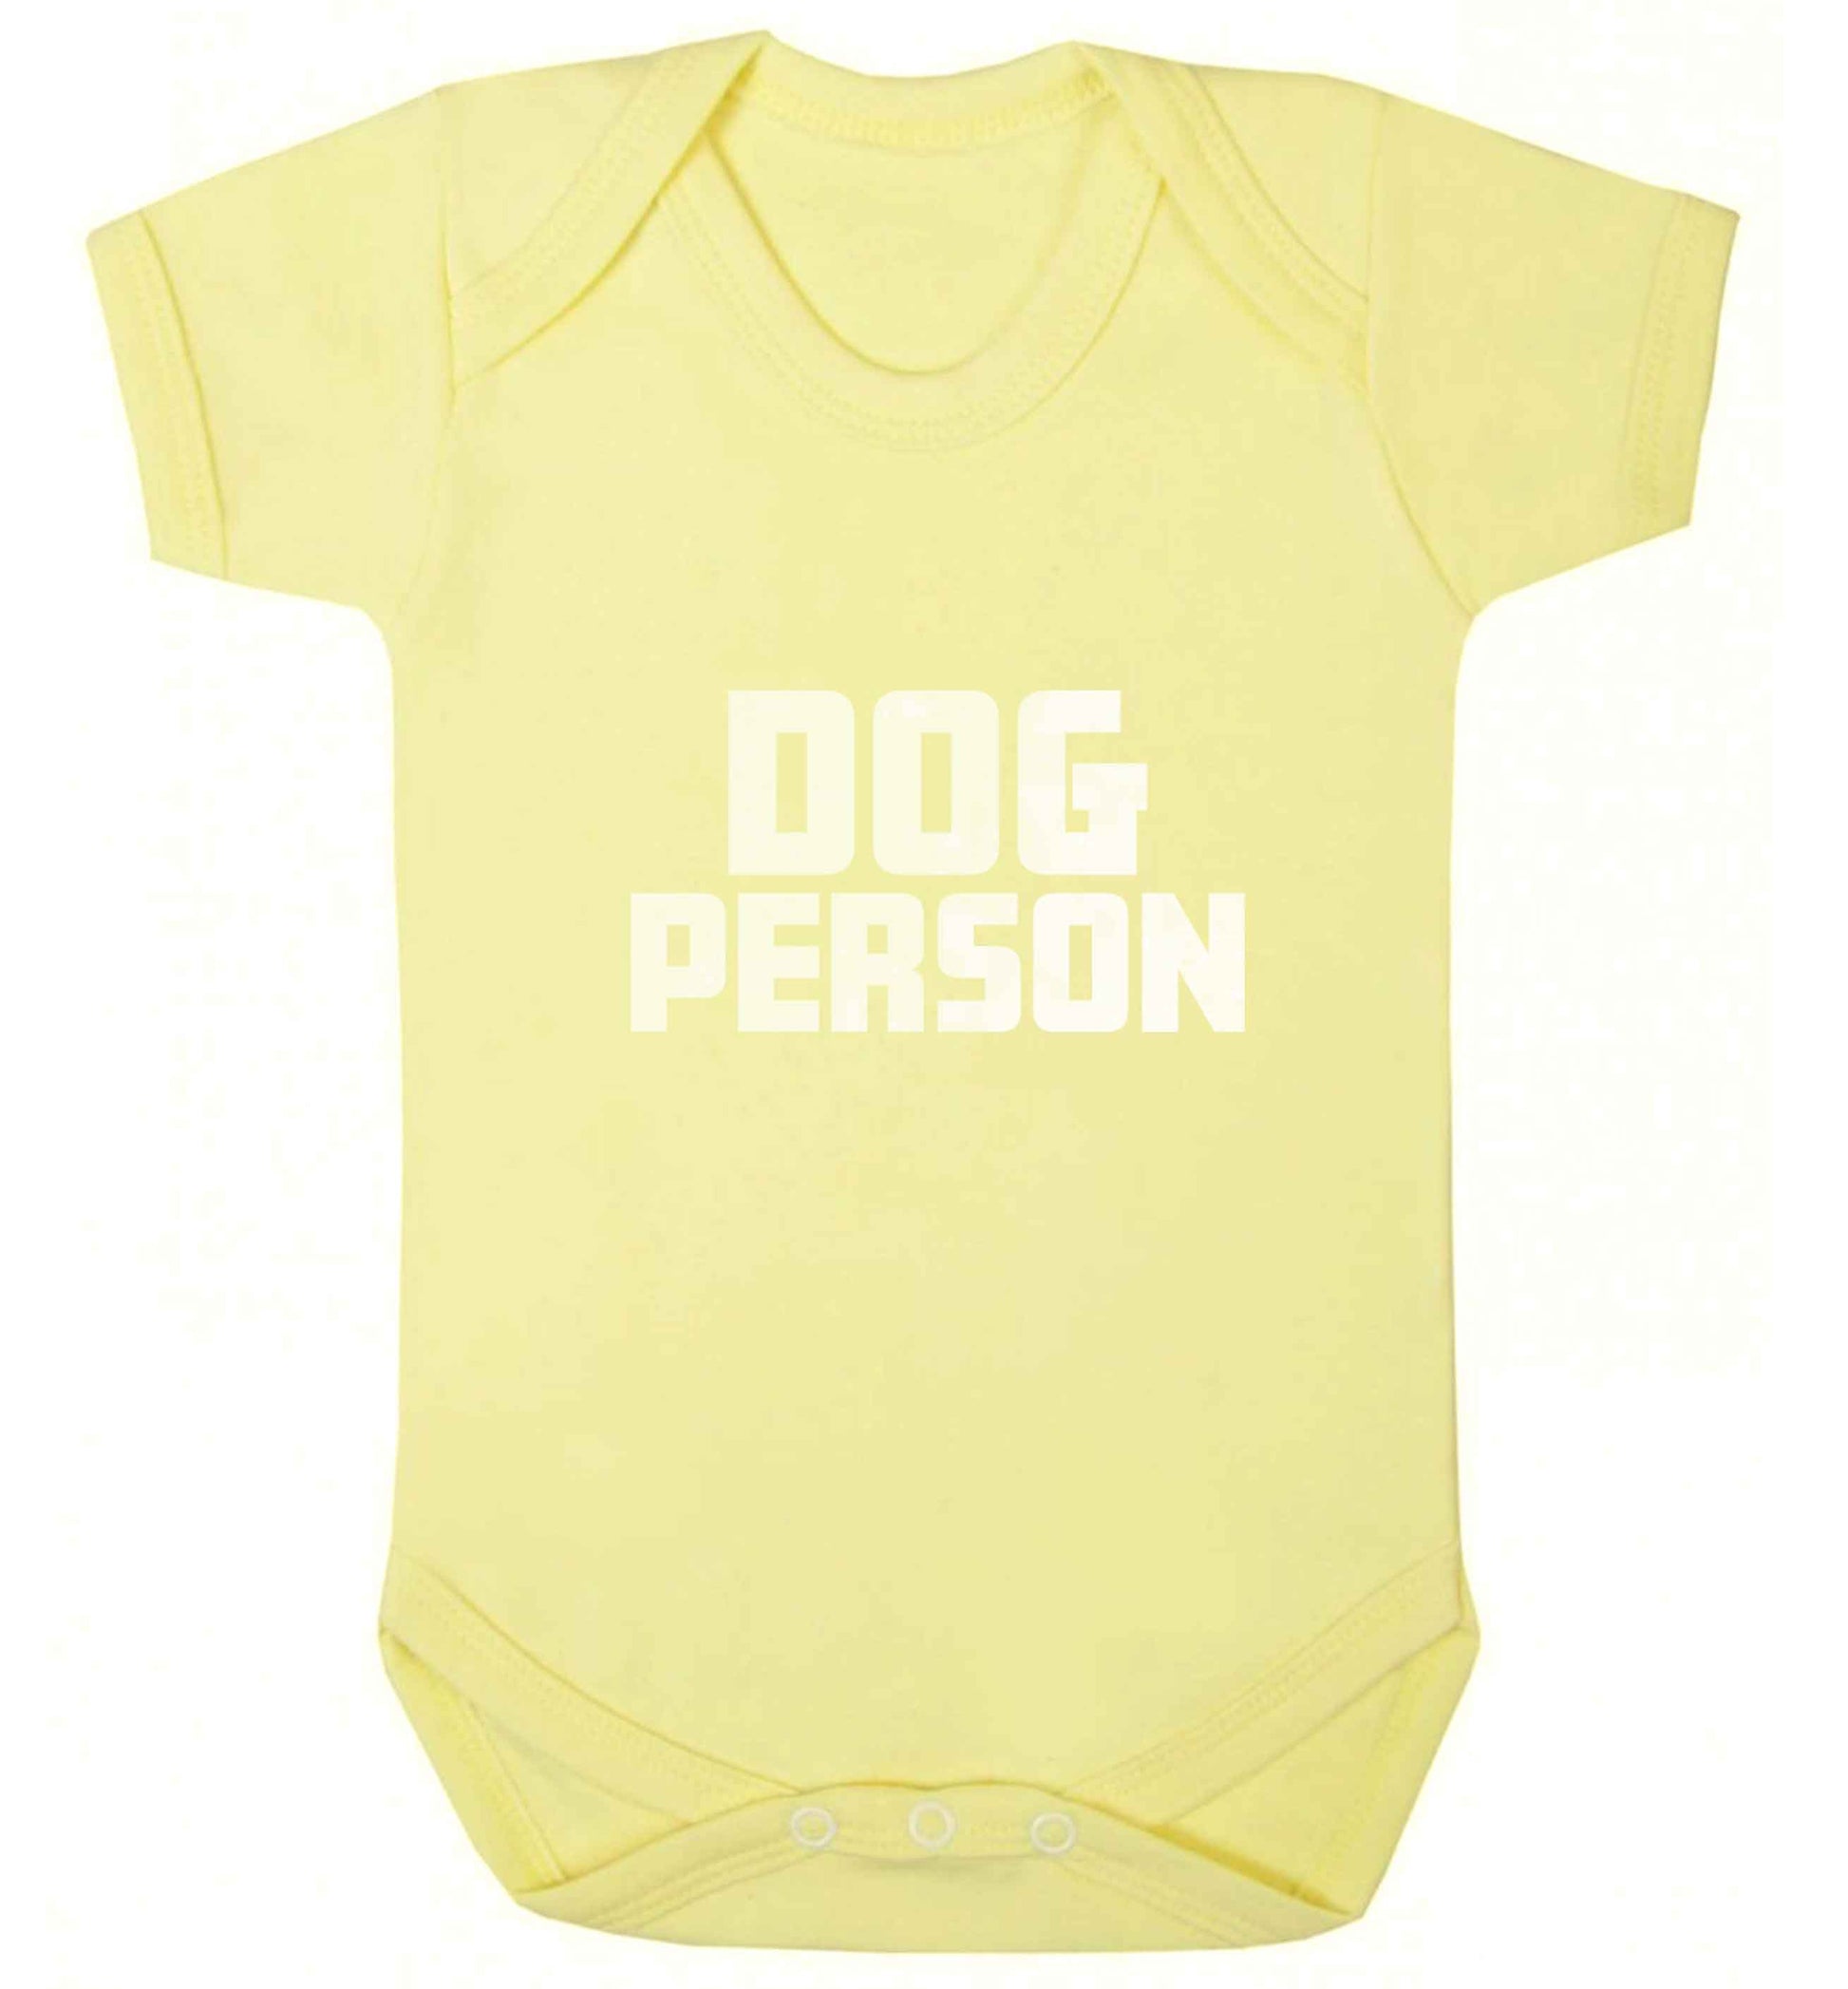 Dog Person Kit baby vest pale yellow 18-24 months